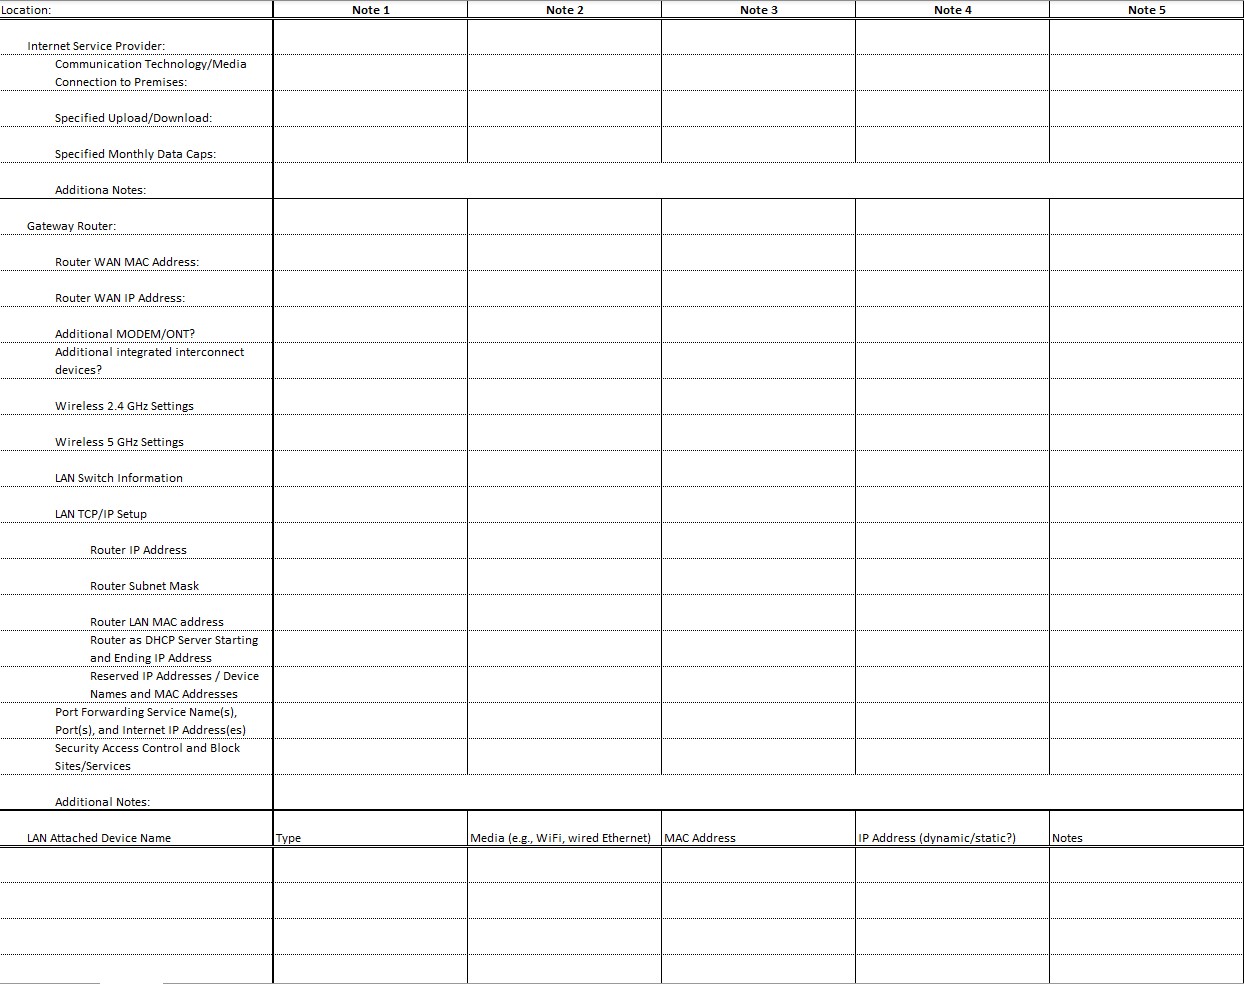 An Excel document with six columns. Headers from left to right: Location, Note 1, Note 2, Note 3, Note 4, Note 5. Rows in the location column list networking terms, such as Internet Service Provider, Gateway Router, etc.